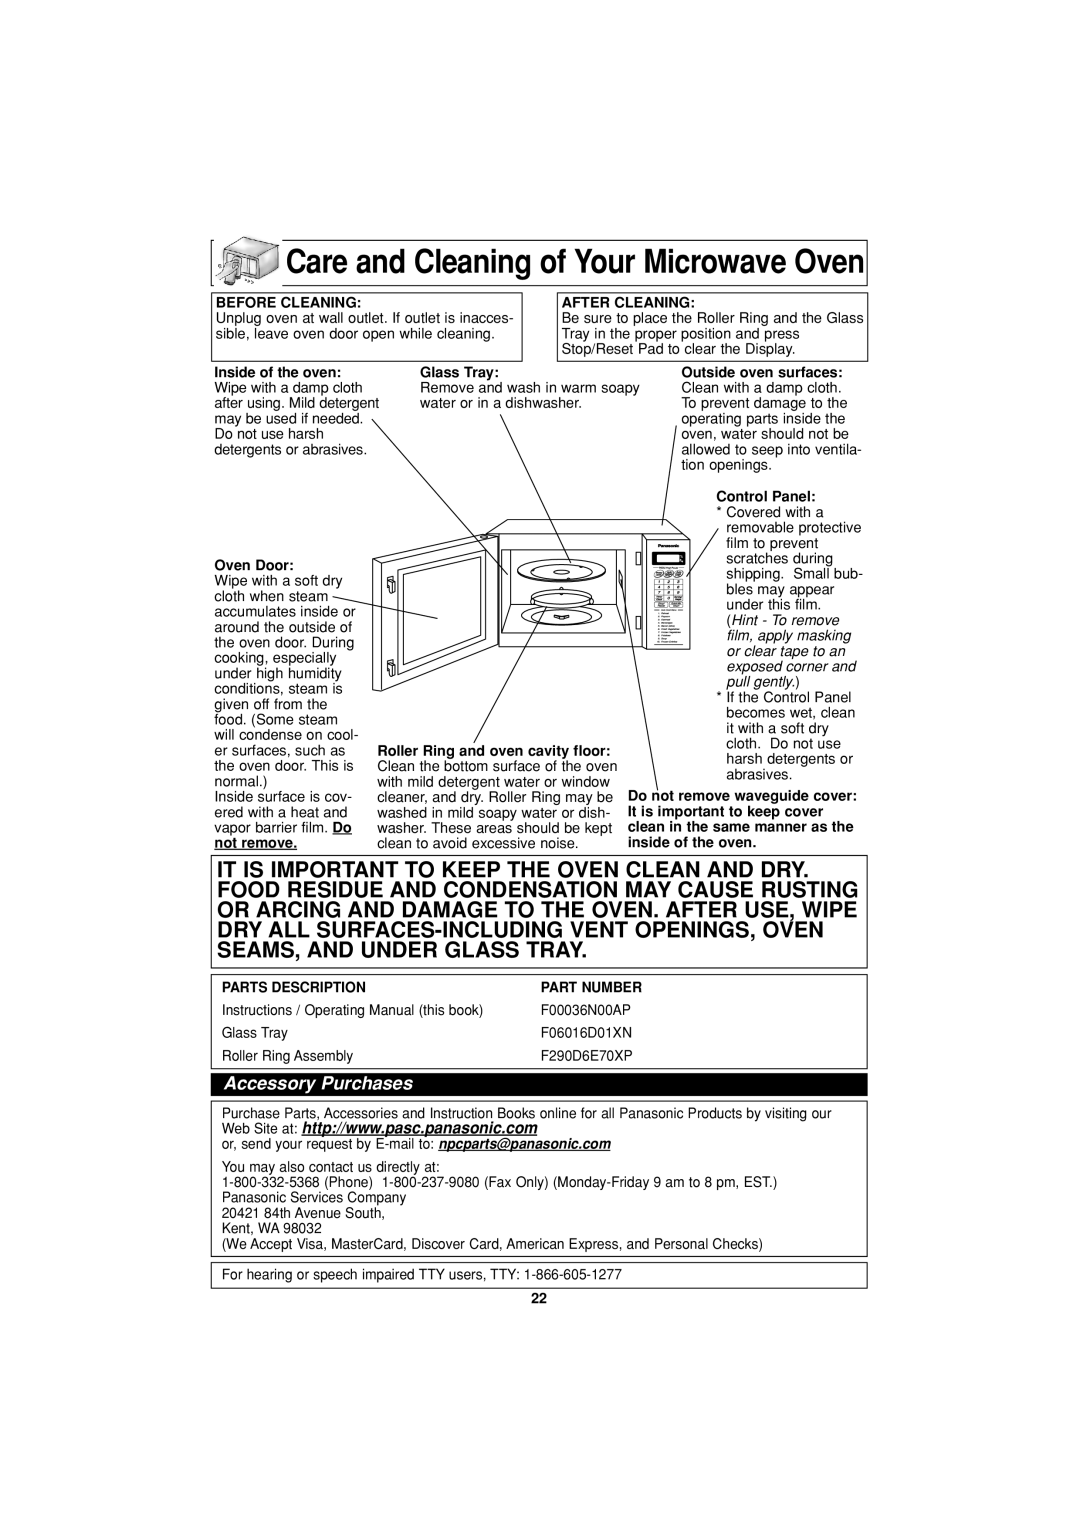 Panasonic NN-S334 important safety instructions Care and Cleaning of Your Microwave Oven, Accessory Purchases 